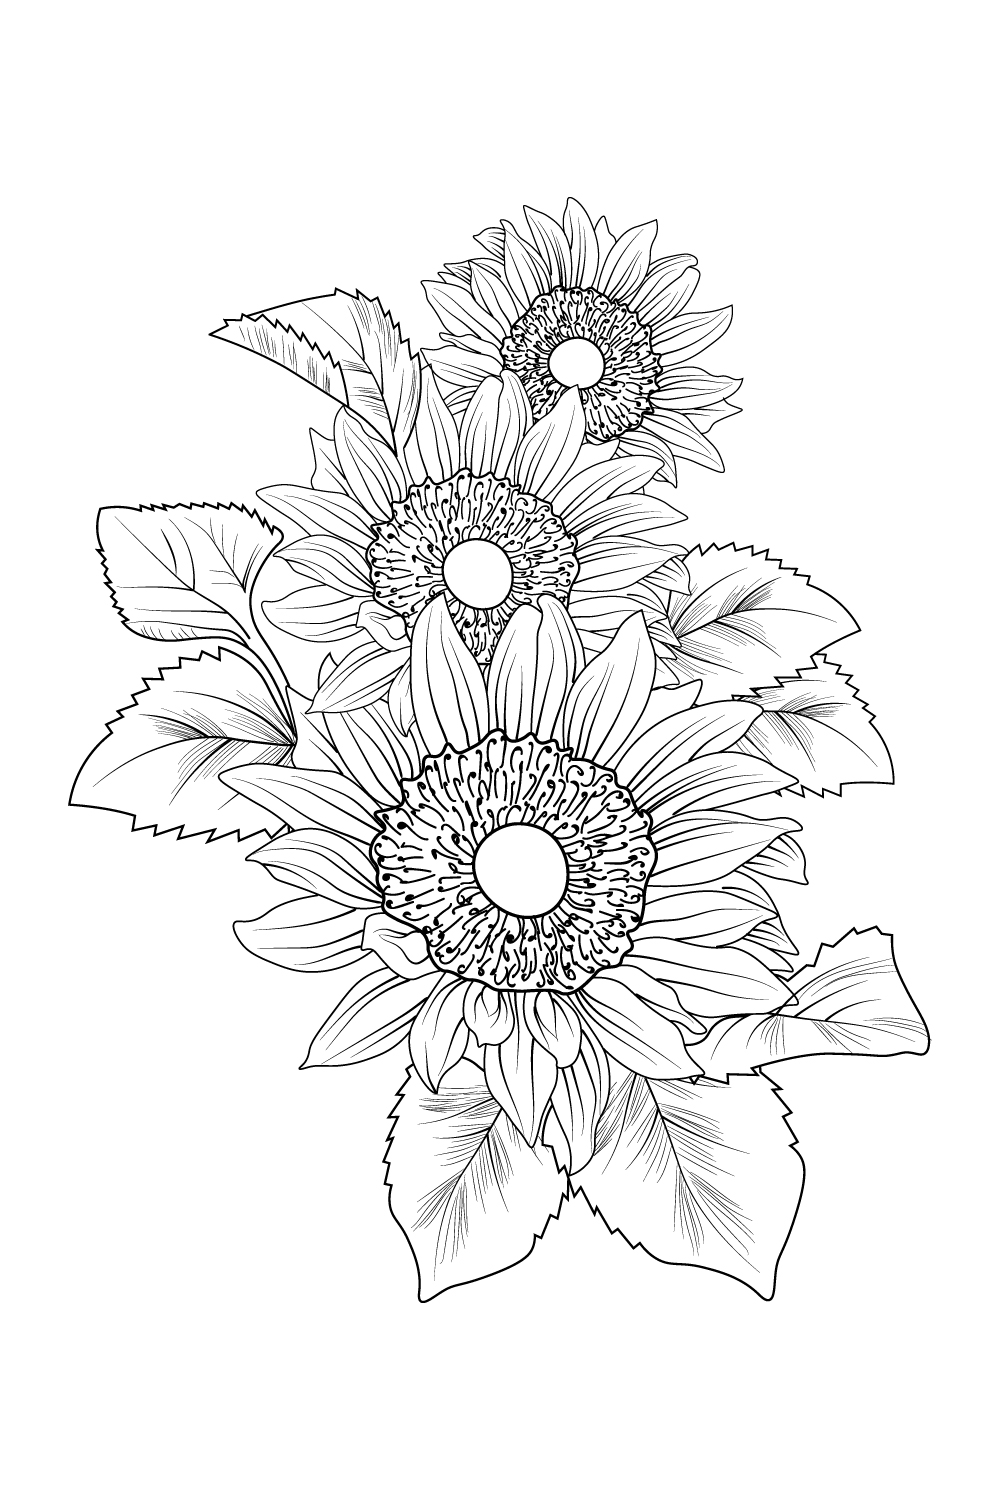 Buy Sunflower Tattoo Designs Instant Download Online in India  Etsy